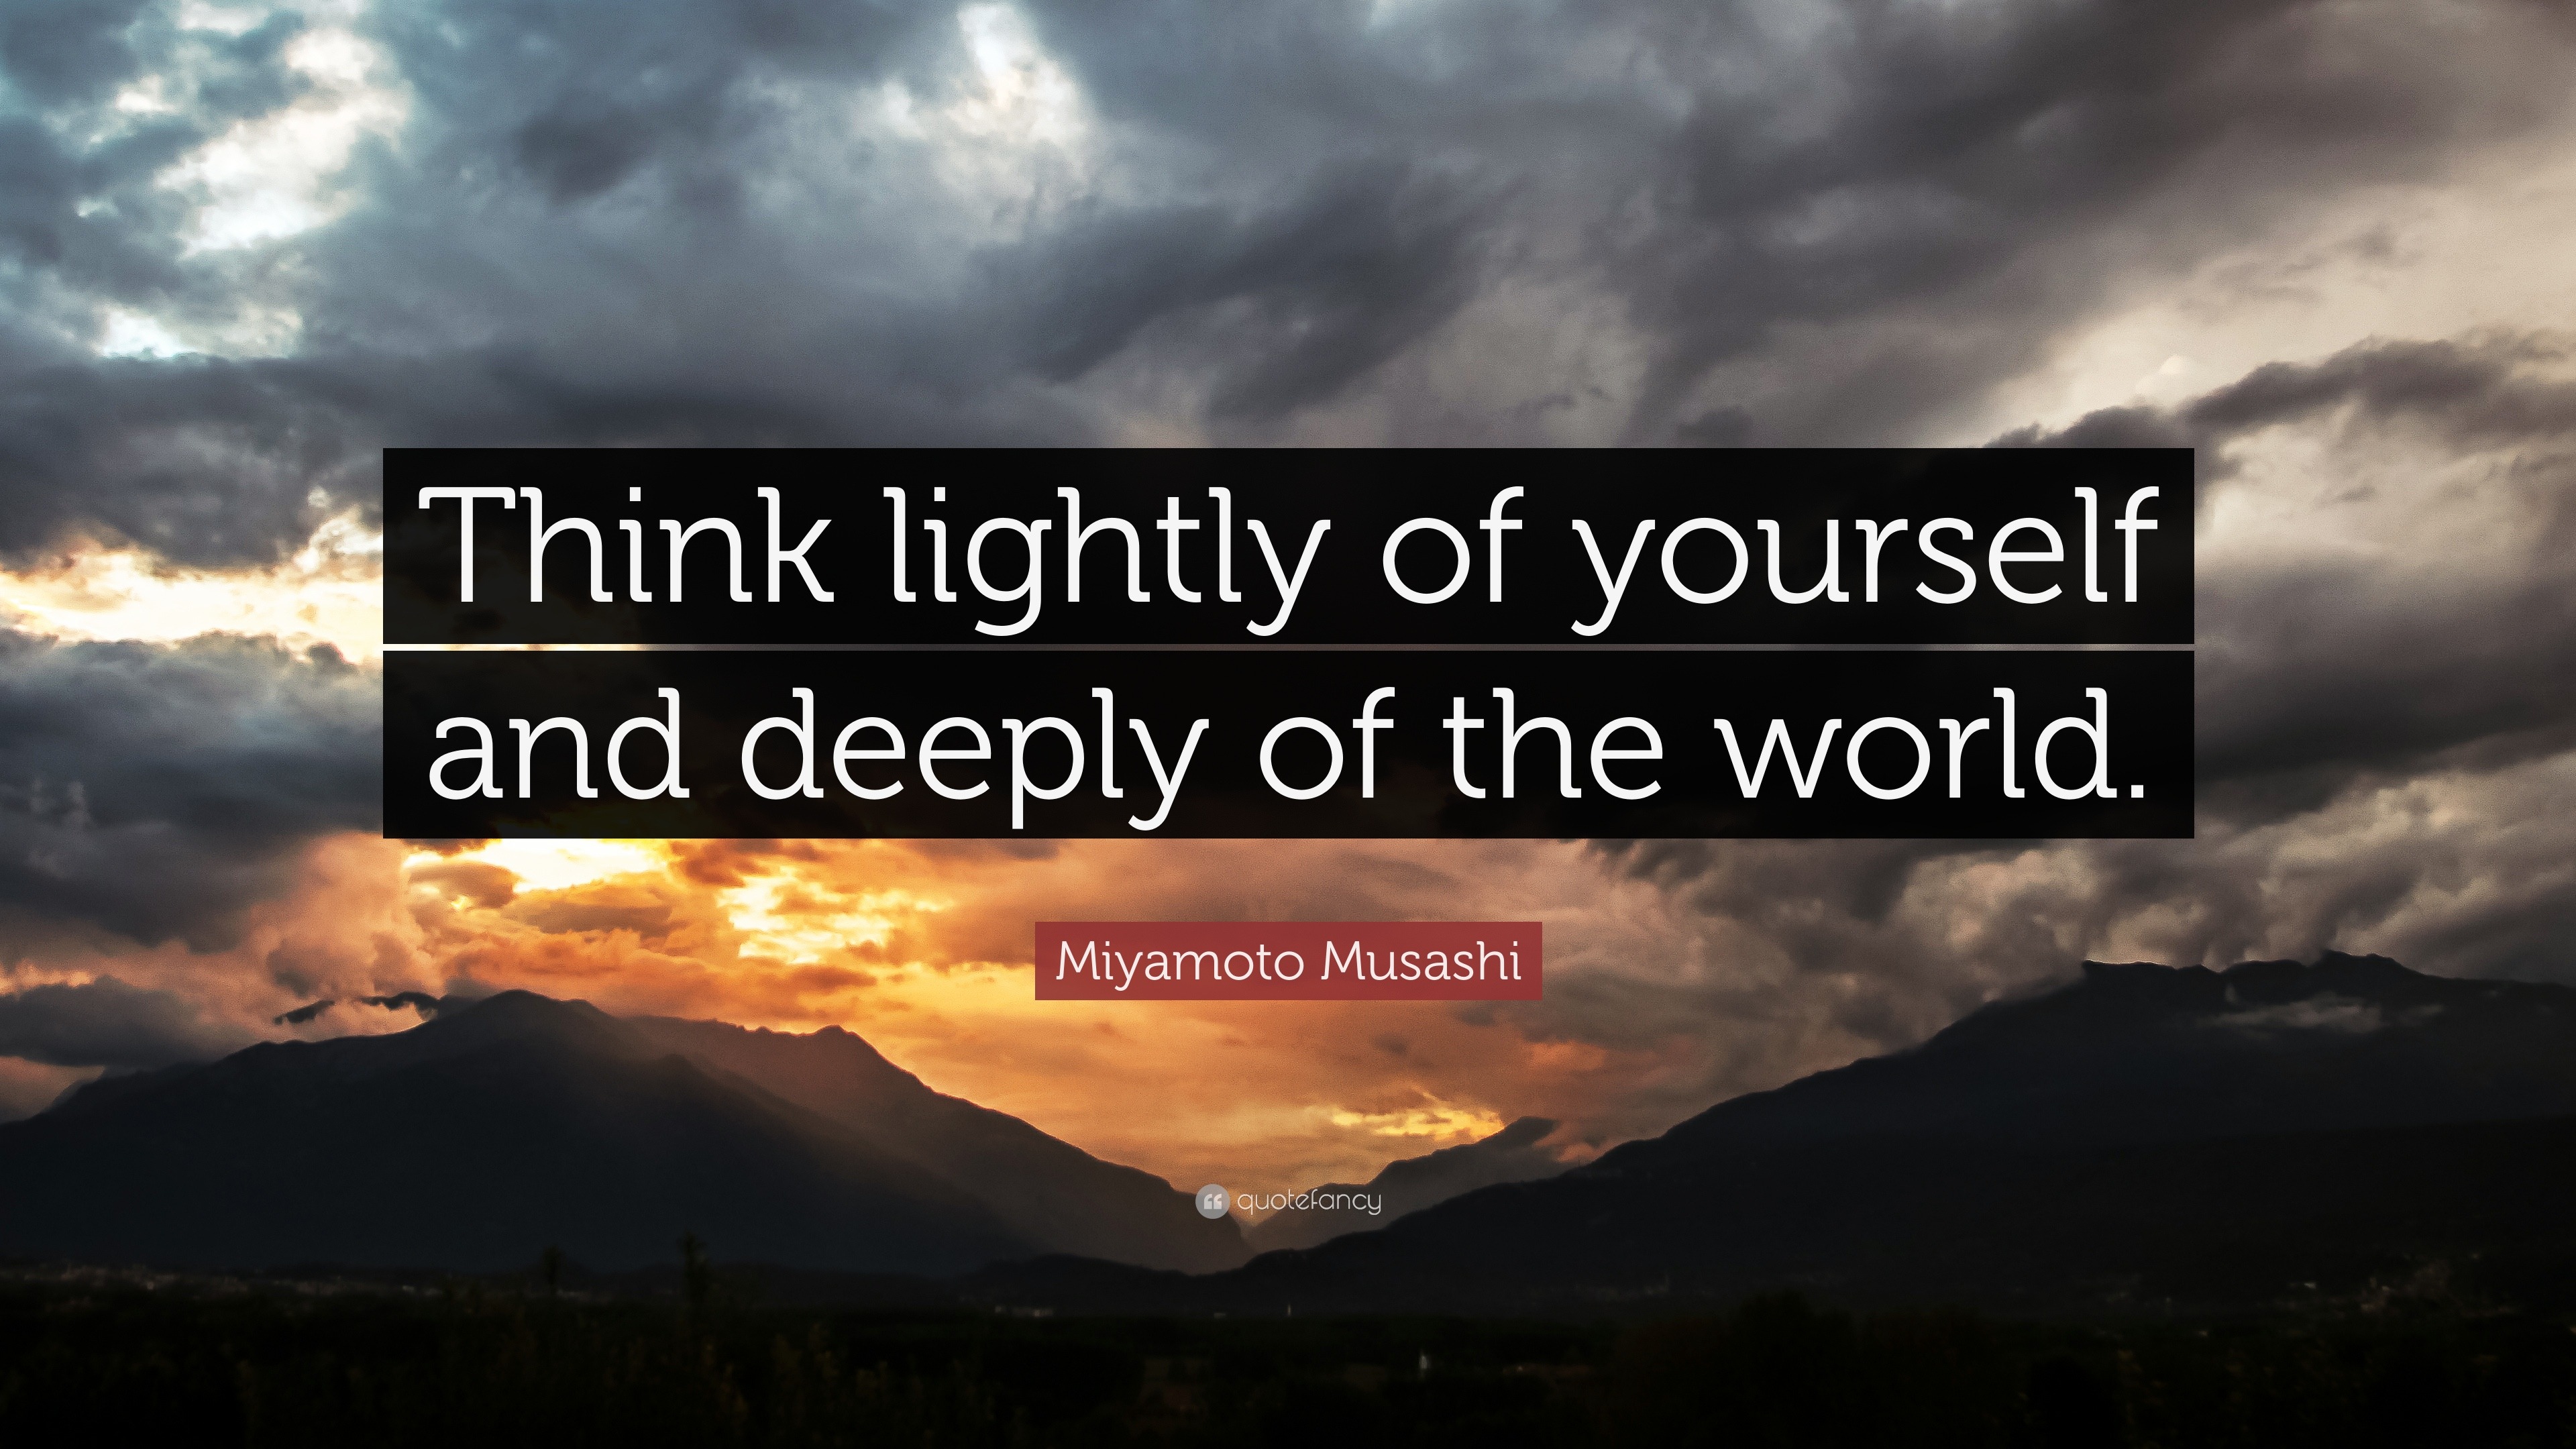 Miyamoto Musashi Quote: “Think lightly of yourself and deeply of the ...